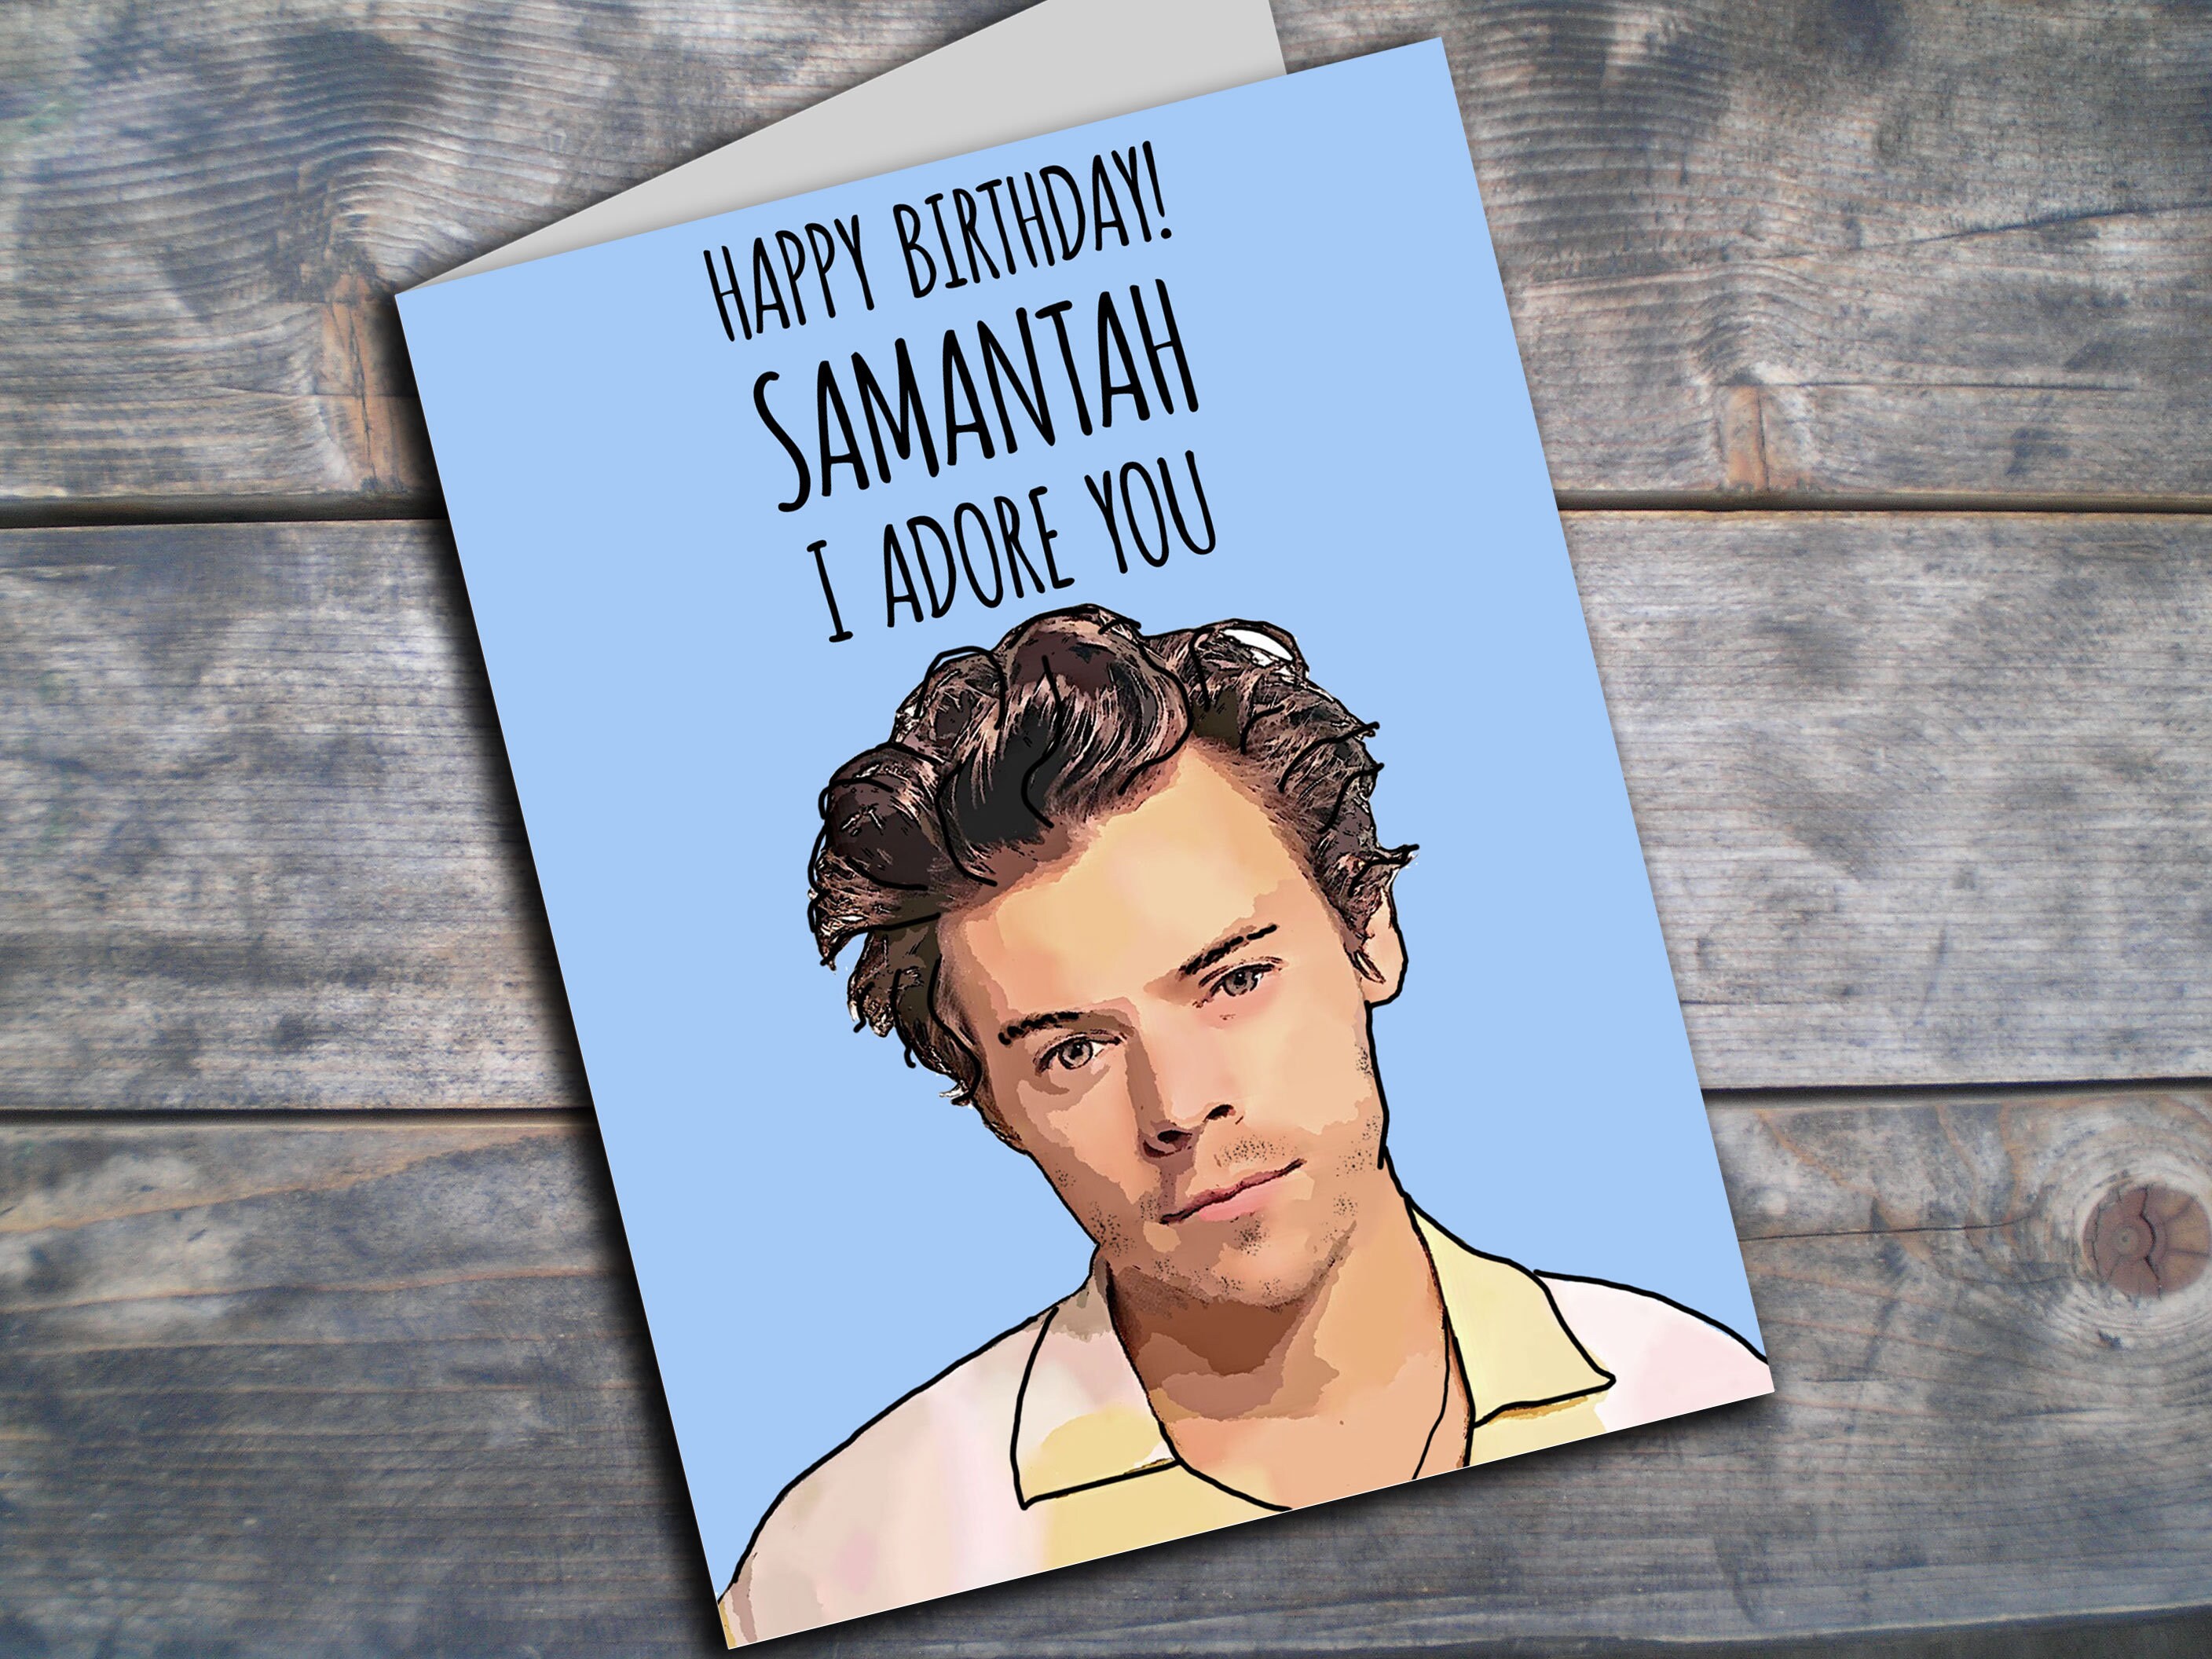 Harry Styles Red Birthday Card Celebrity Facemaskscom Harry Styles 